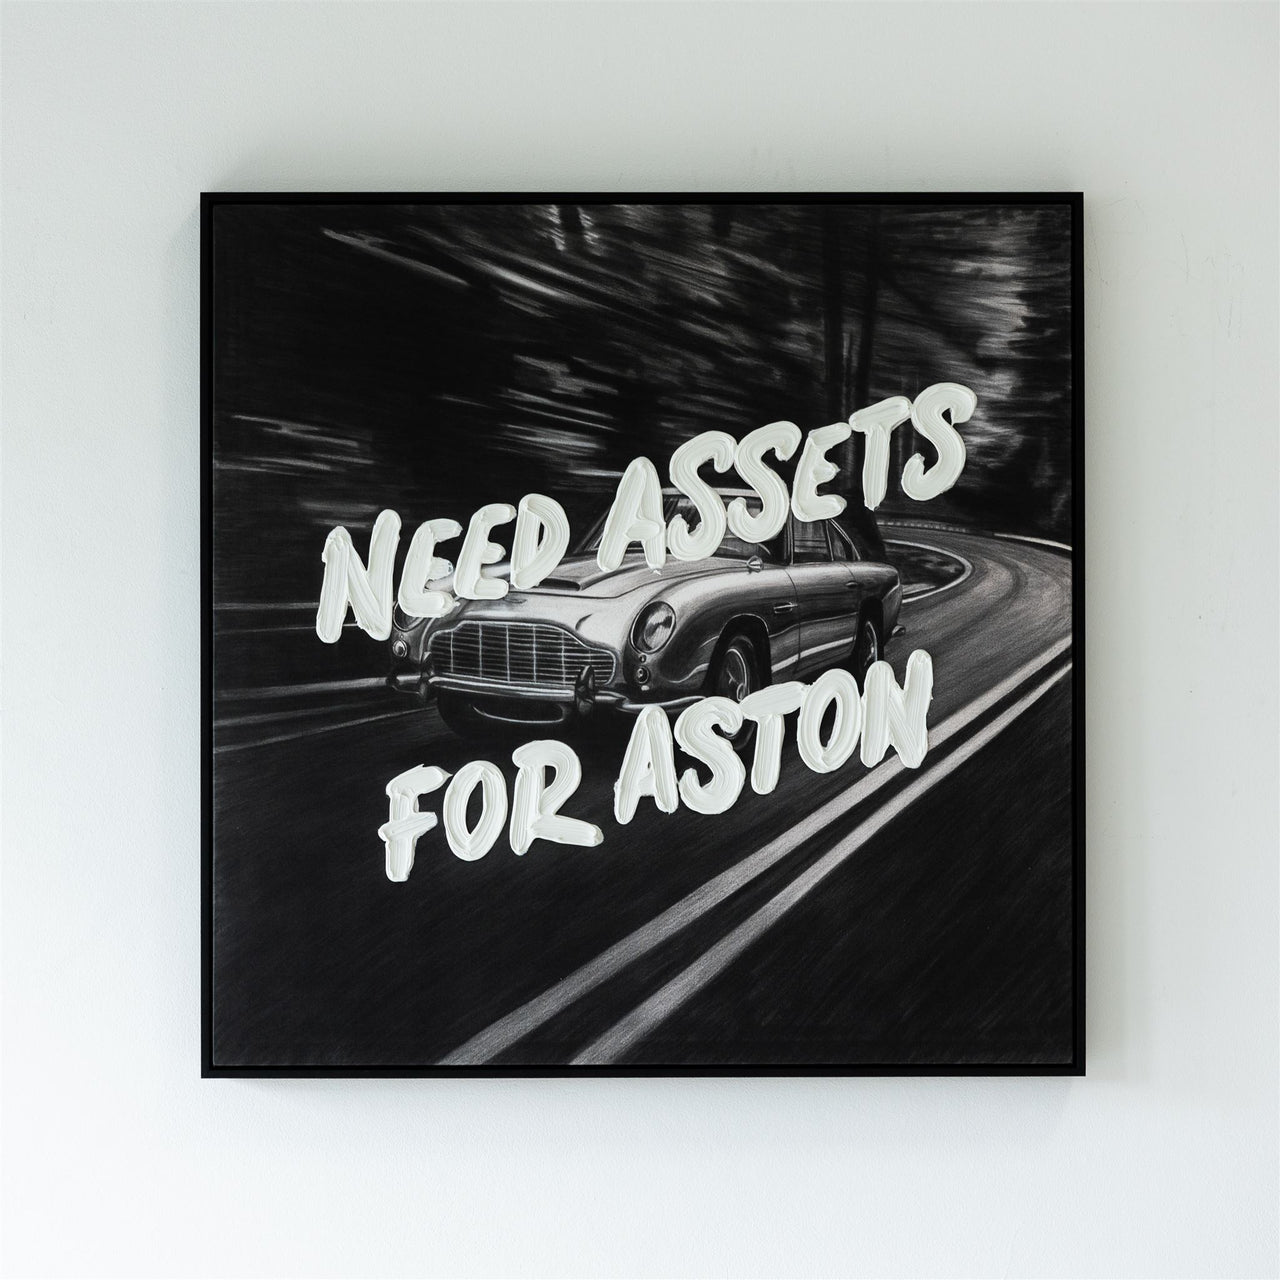 NEED ASSETS FOR ASTON PRINT